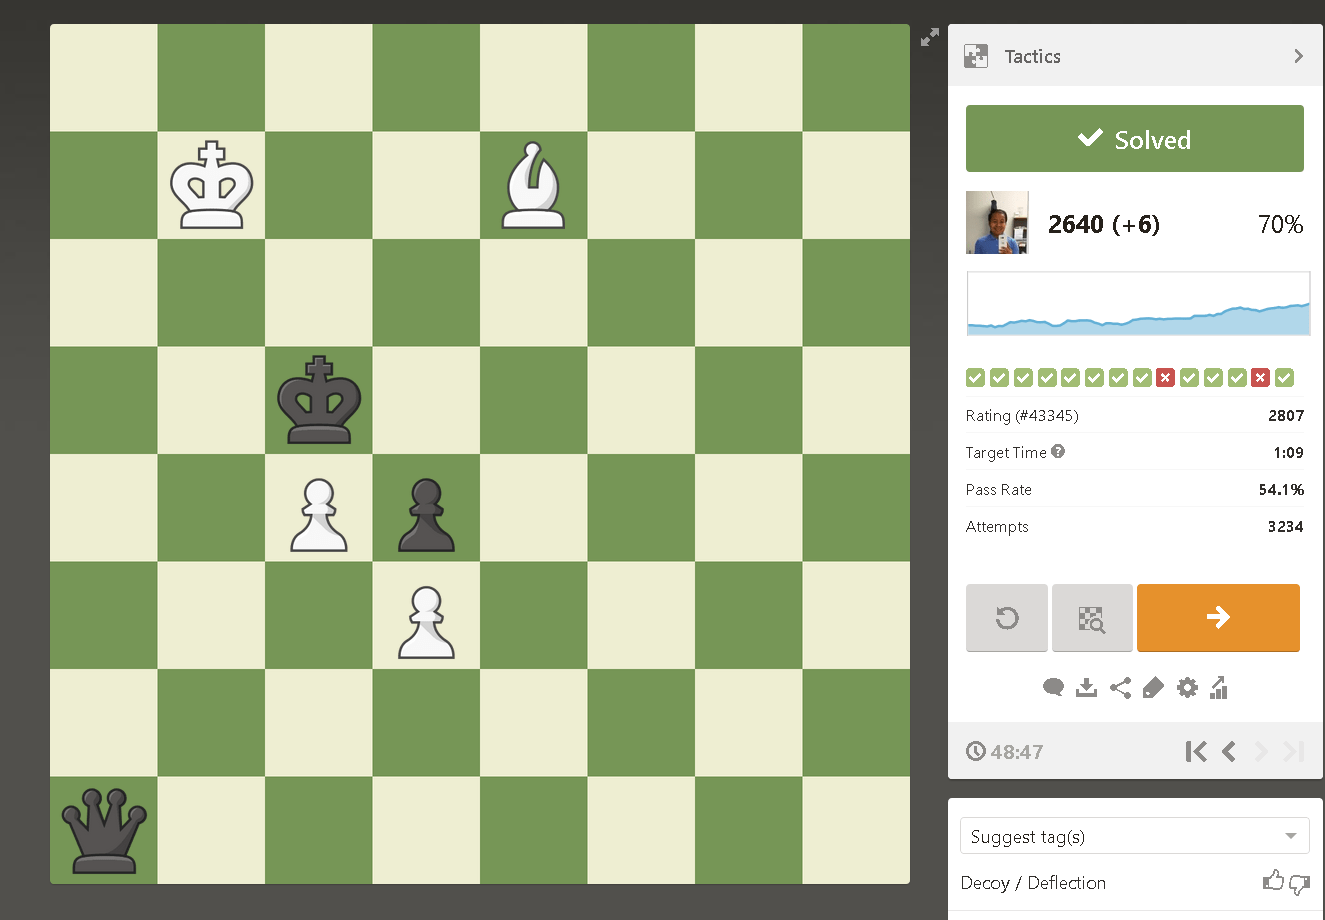 This puzzle is rated 4000 on chess.com and has a 100% fail rate